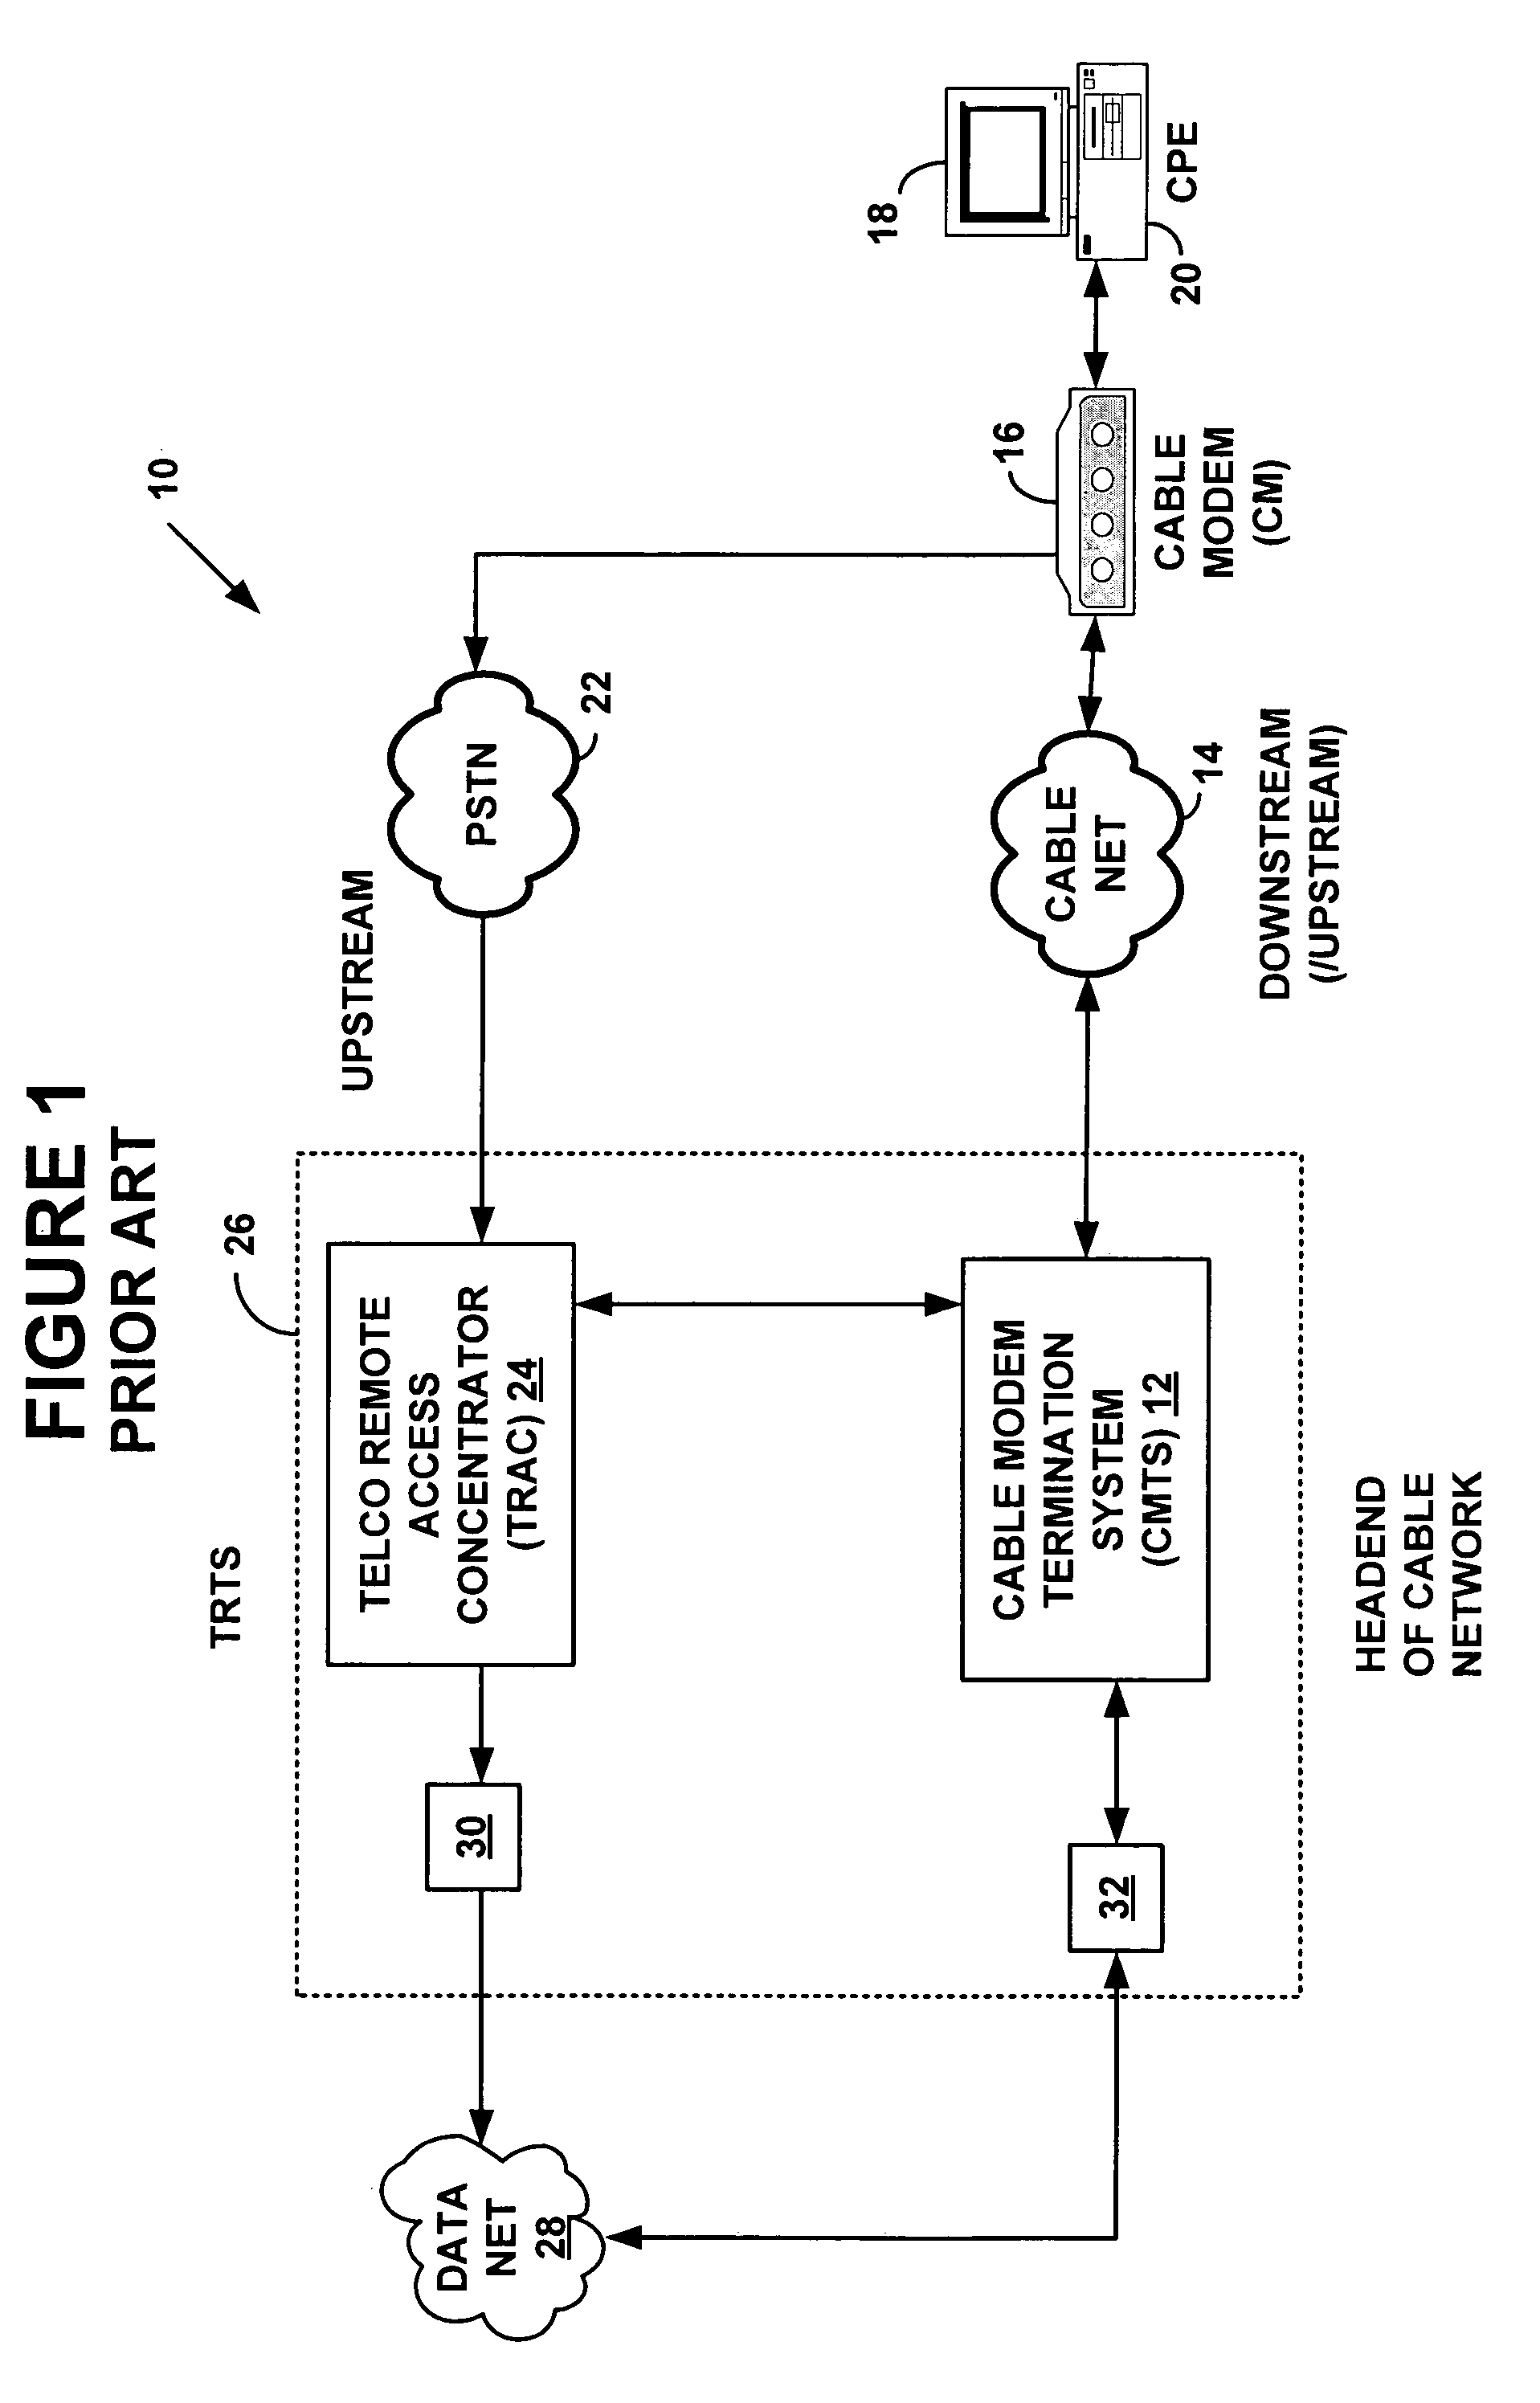 System and method for a multi-frequency upstream channel in a computer network